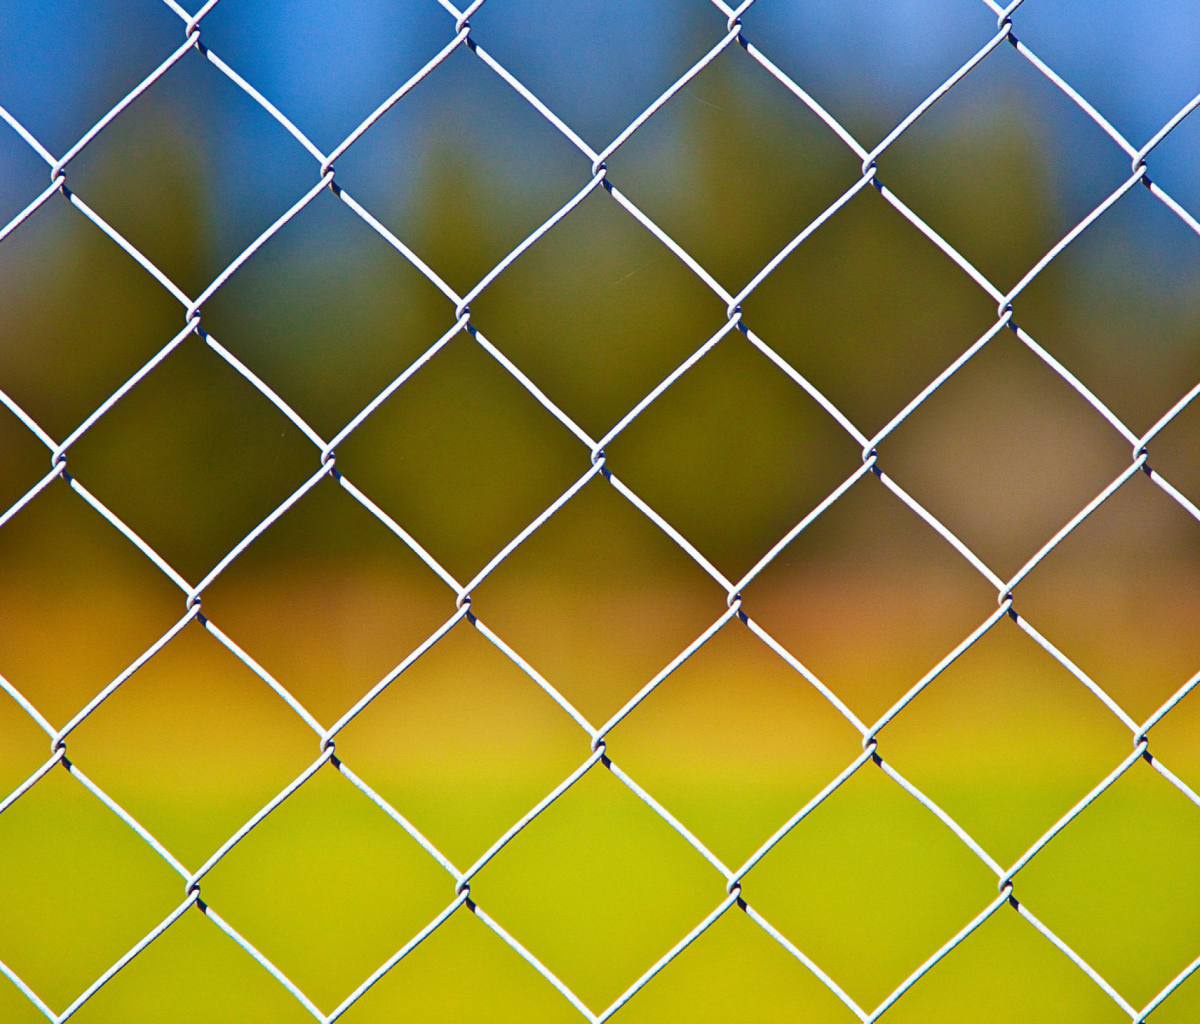 Cage Fence wallpaper 1200x1024